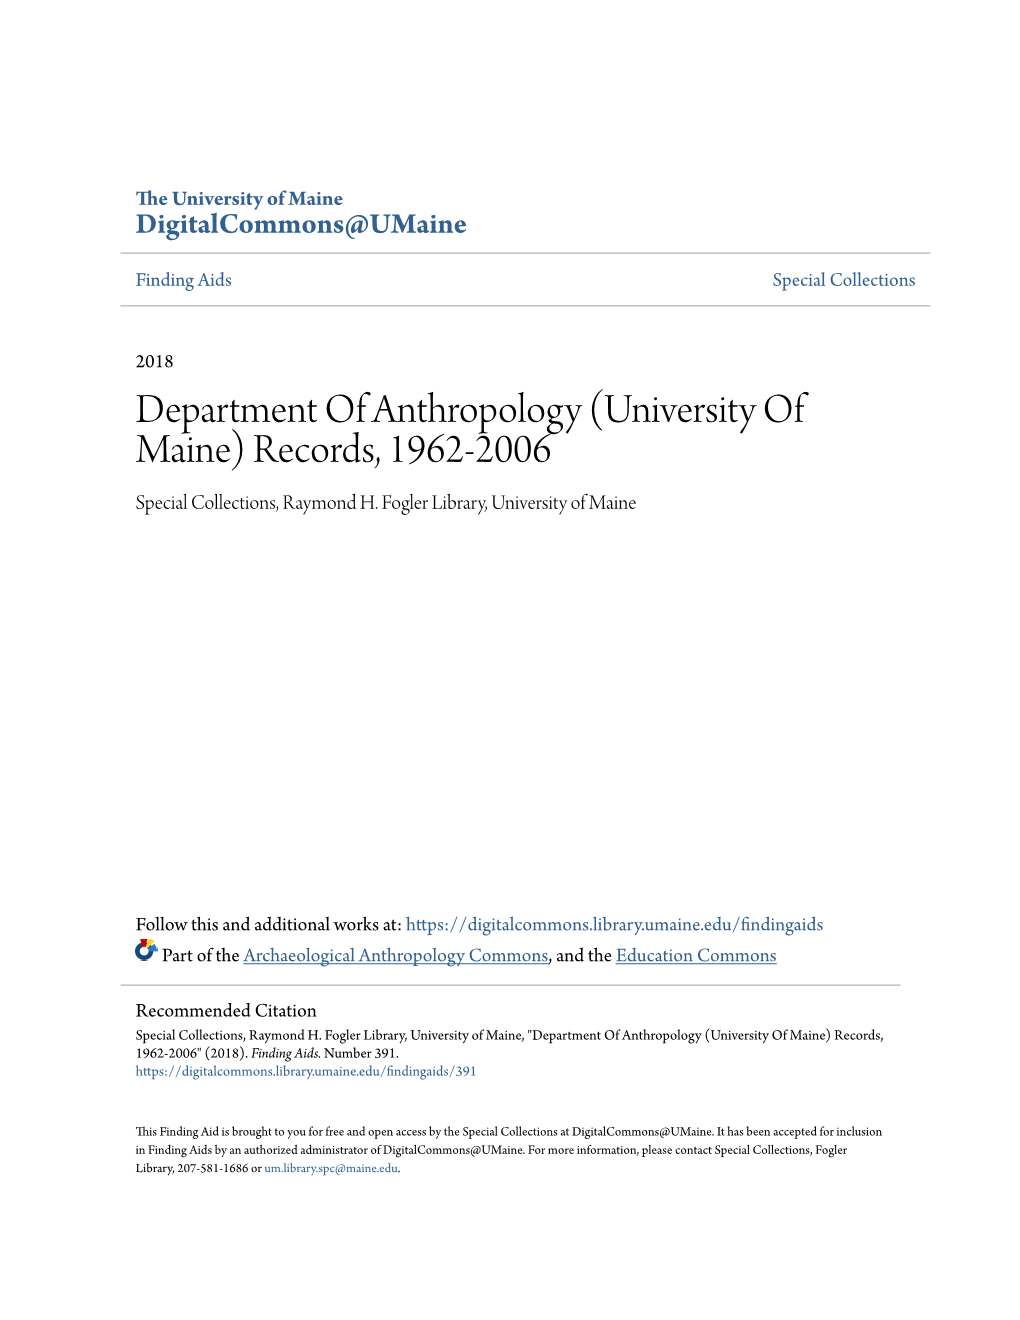 Department of Anthropology (University of Maine) Records, 1962-2006 Special Collections, Raymond H